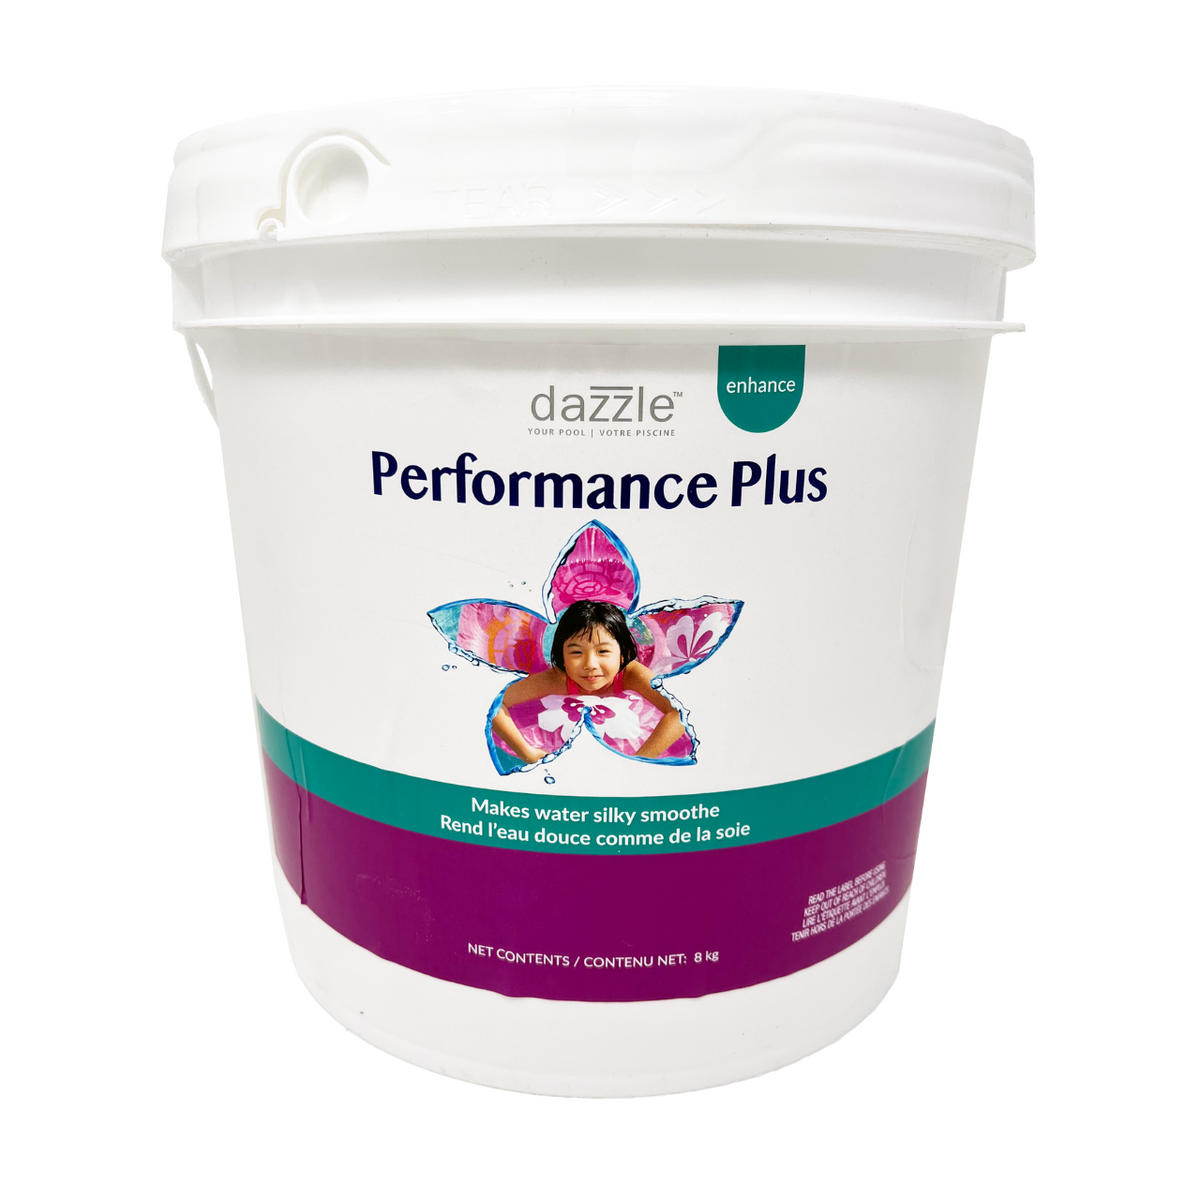 Dazzle™ Performance Plus - Makes water silky smooth